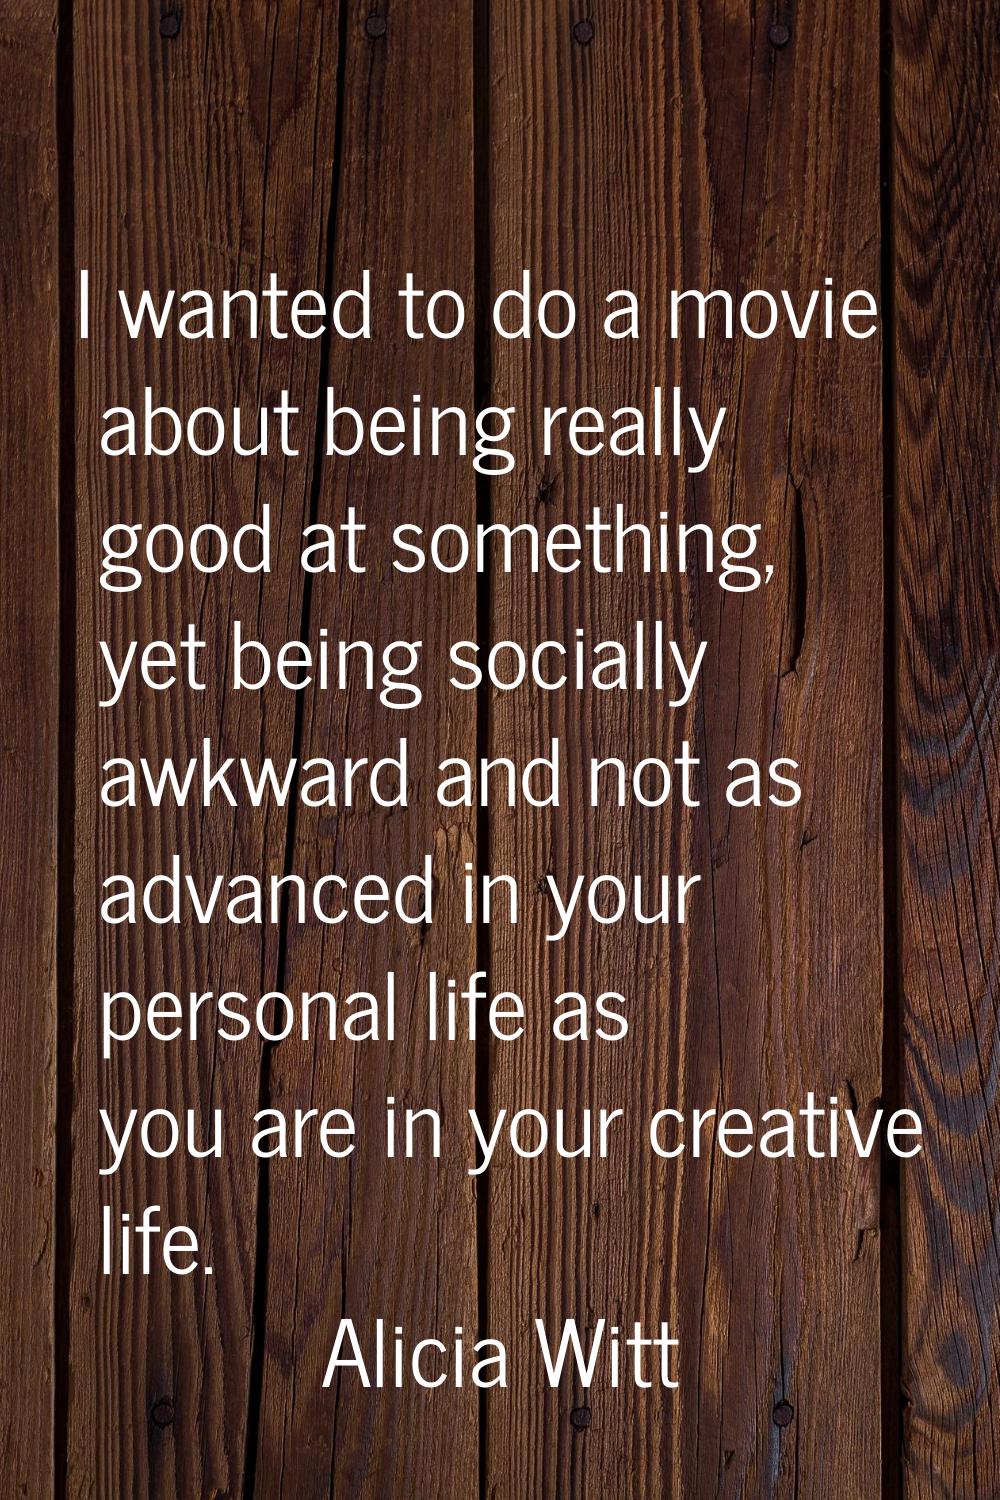 I wanted to do a movie about being really good at something, yet being socially awkward and not as 